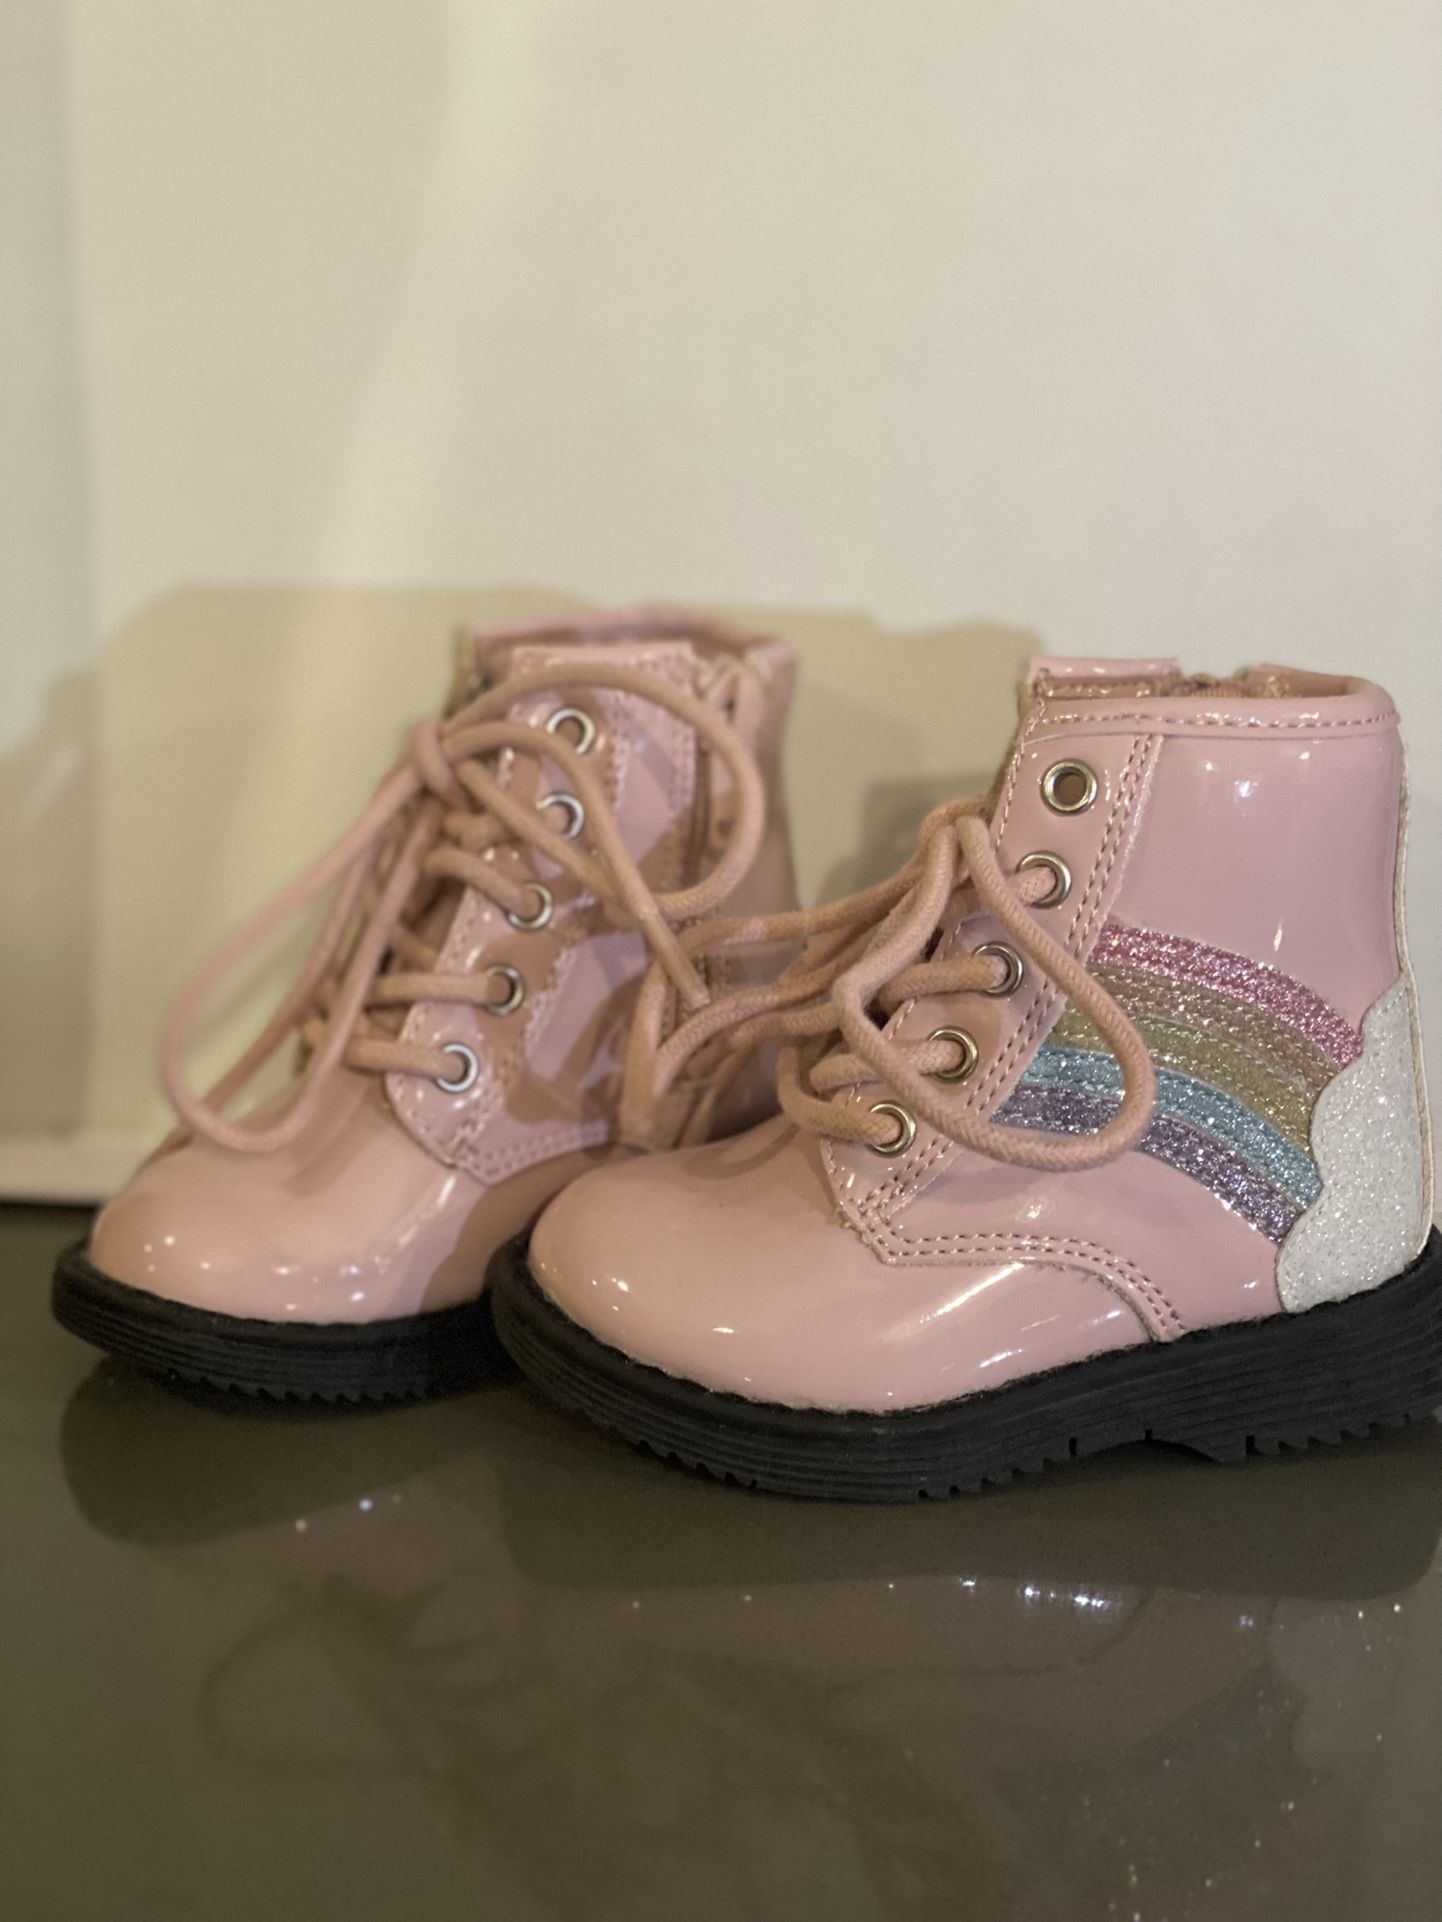 Adorable rainbow toddler boots  